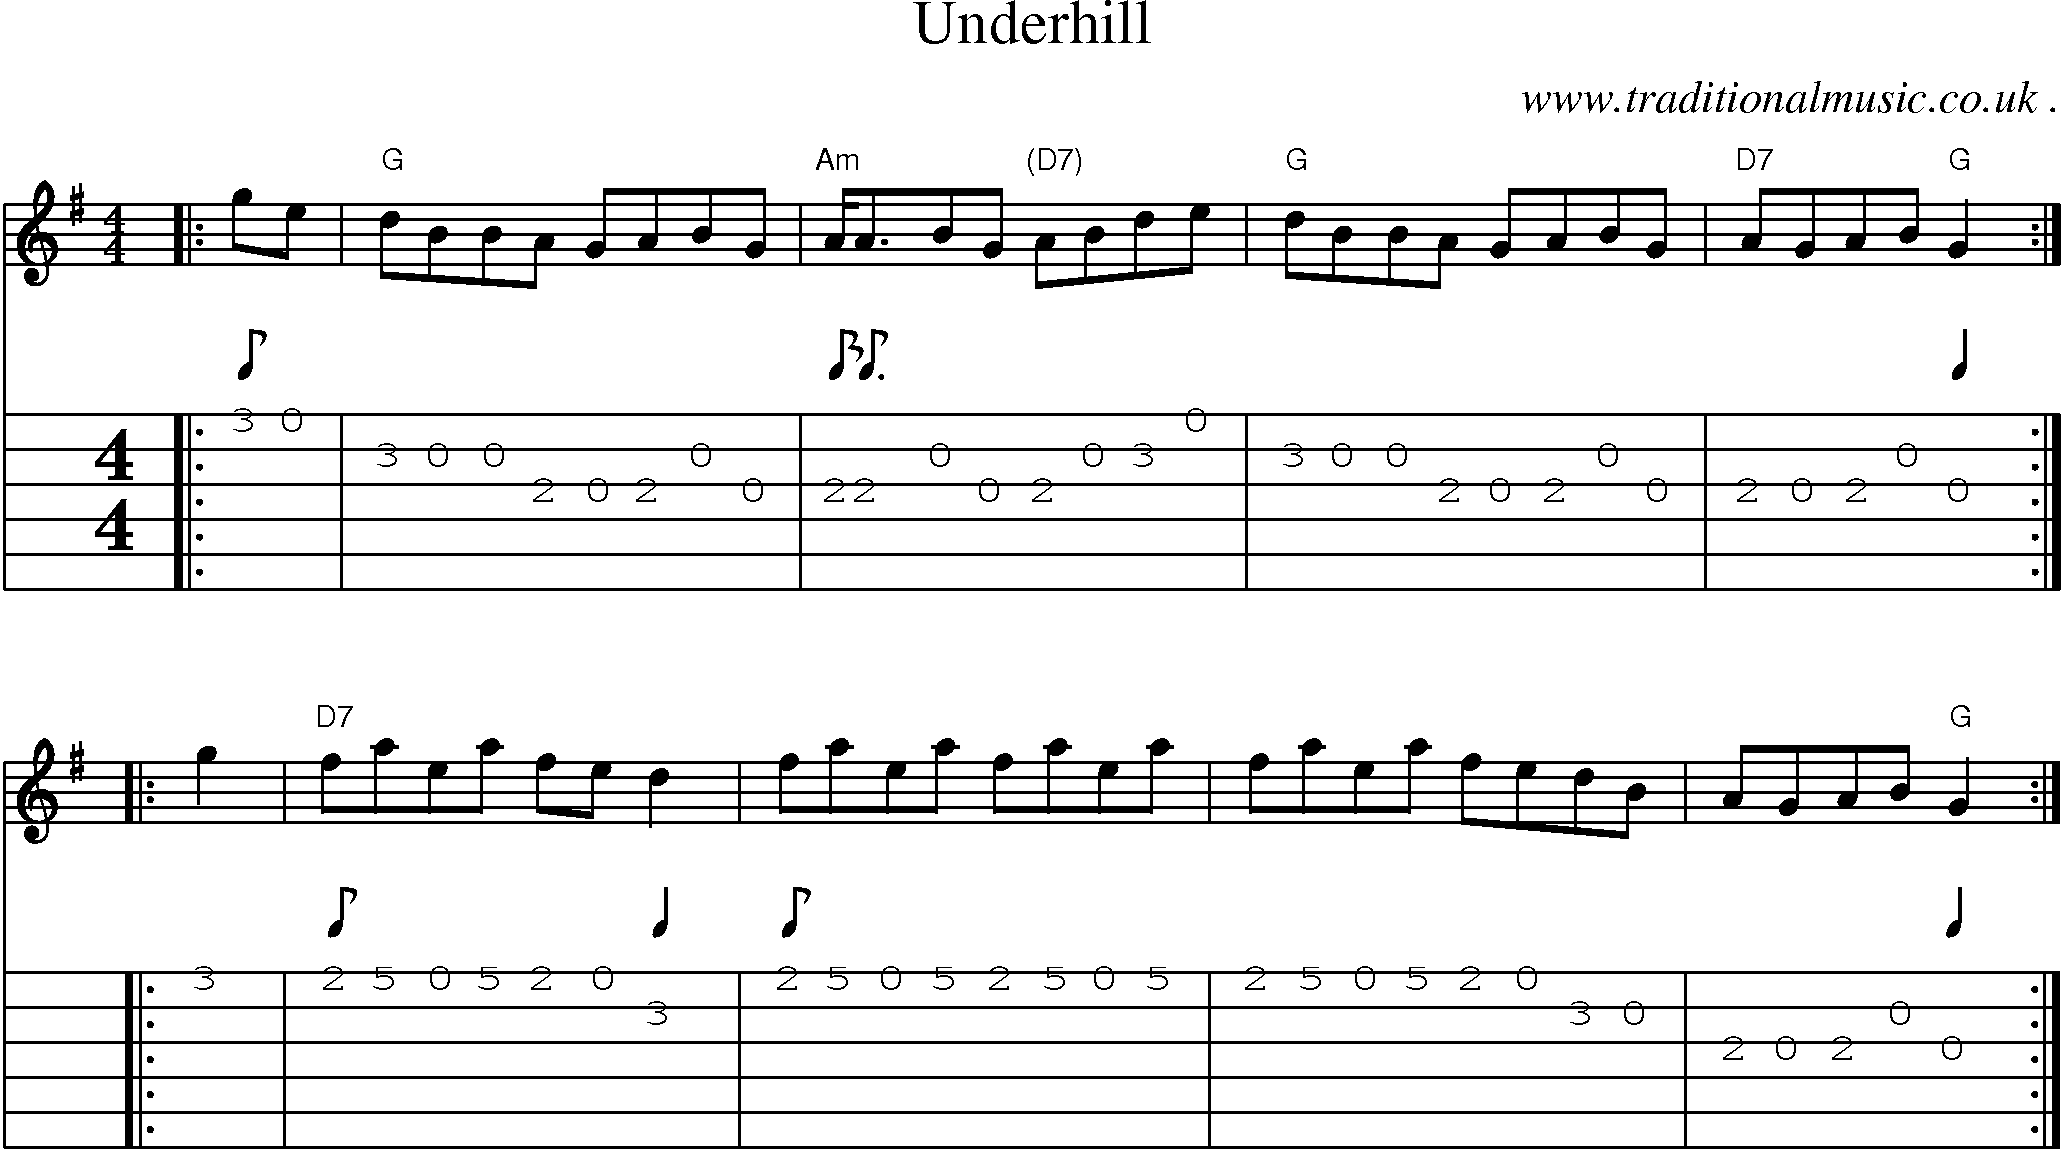 Sheet-music  score, Chords and Guitar Tabs for Underhill